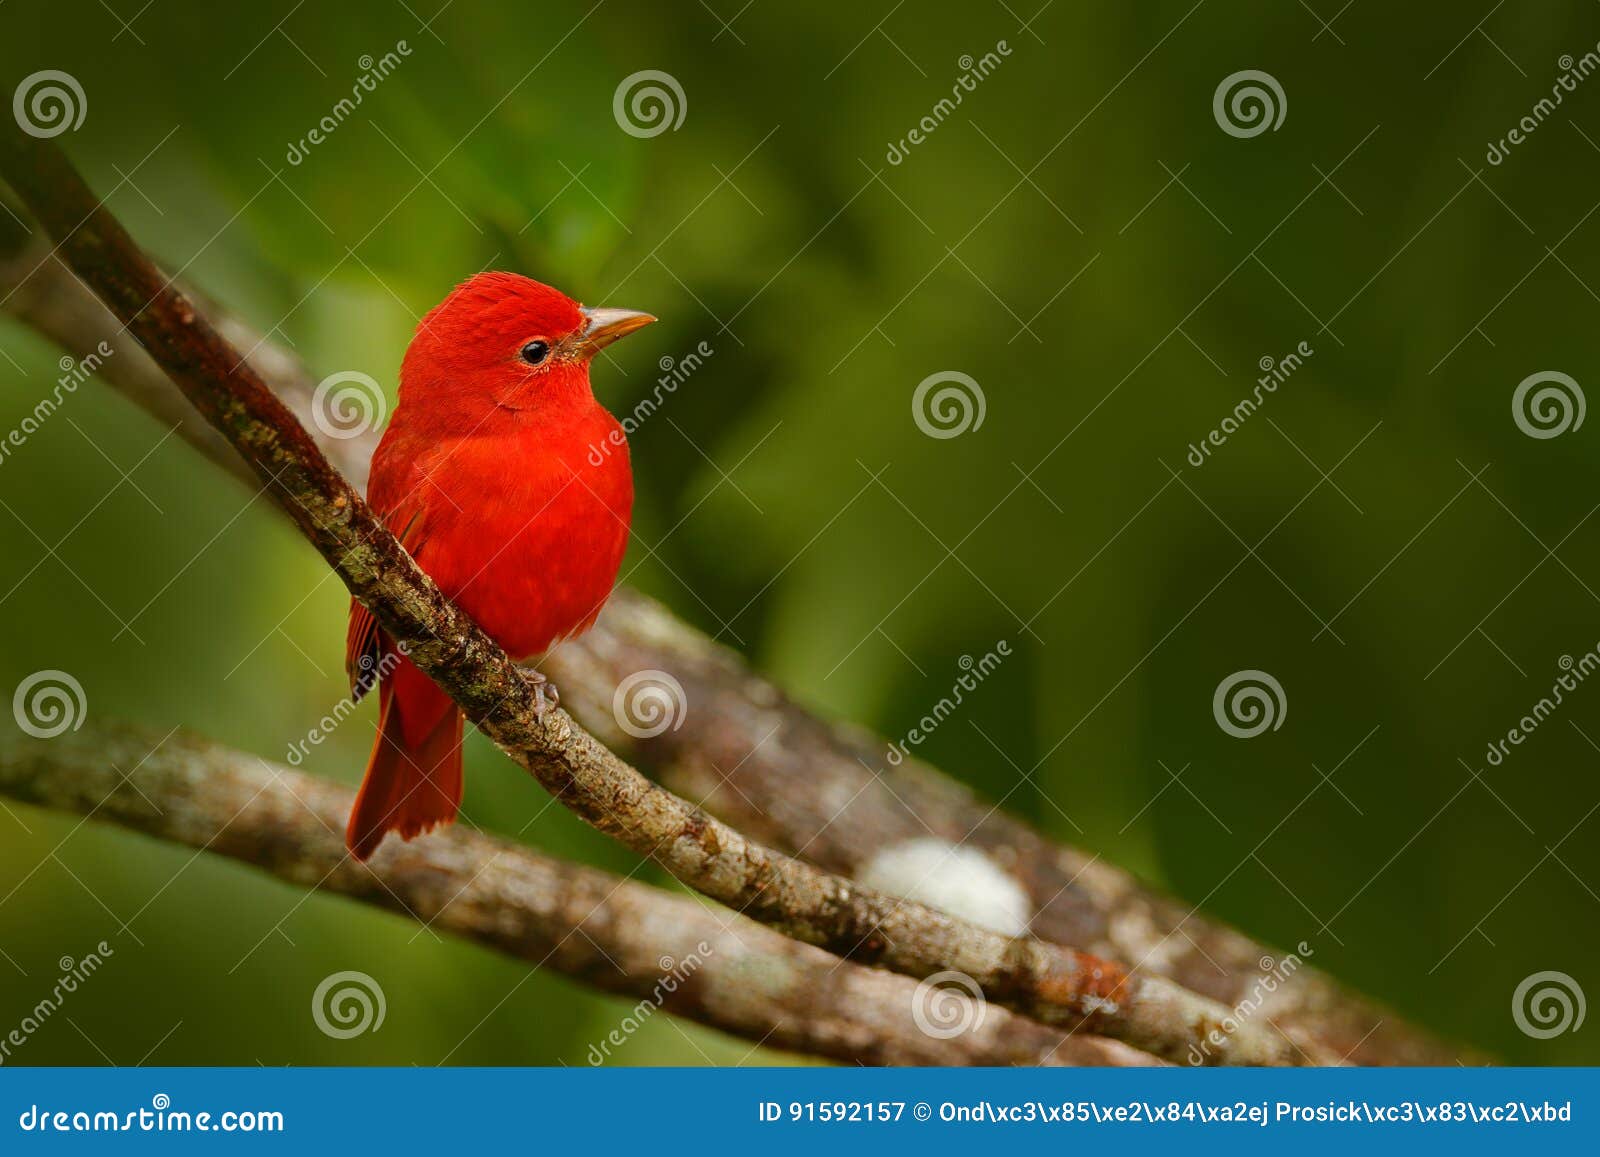 summer tanager, piranga rubra, red bird in the nature habitat. tanager sitting on the green palm tree. birdwatching in costa rica.